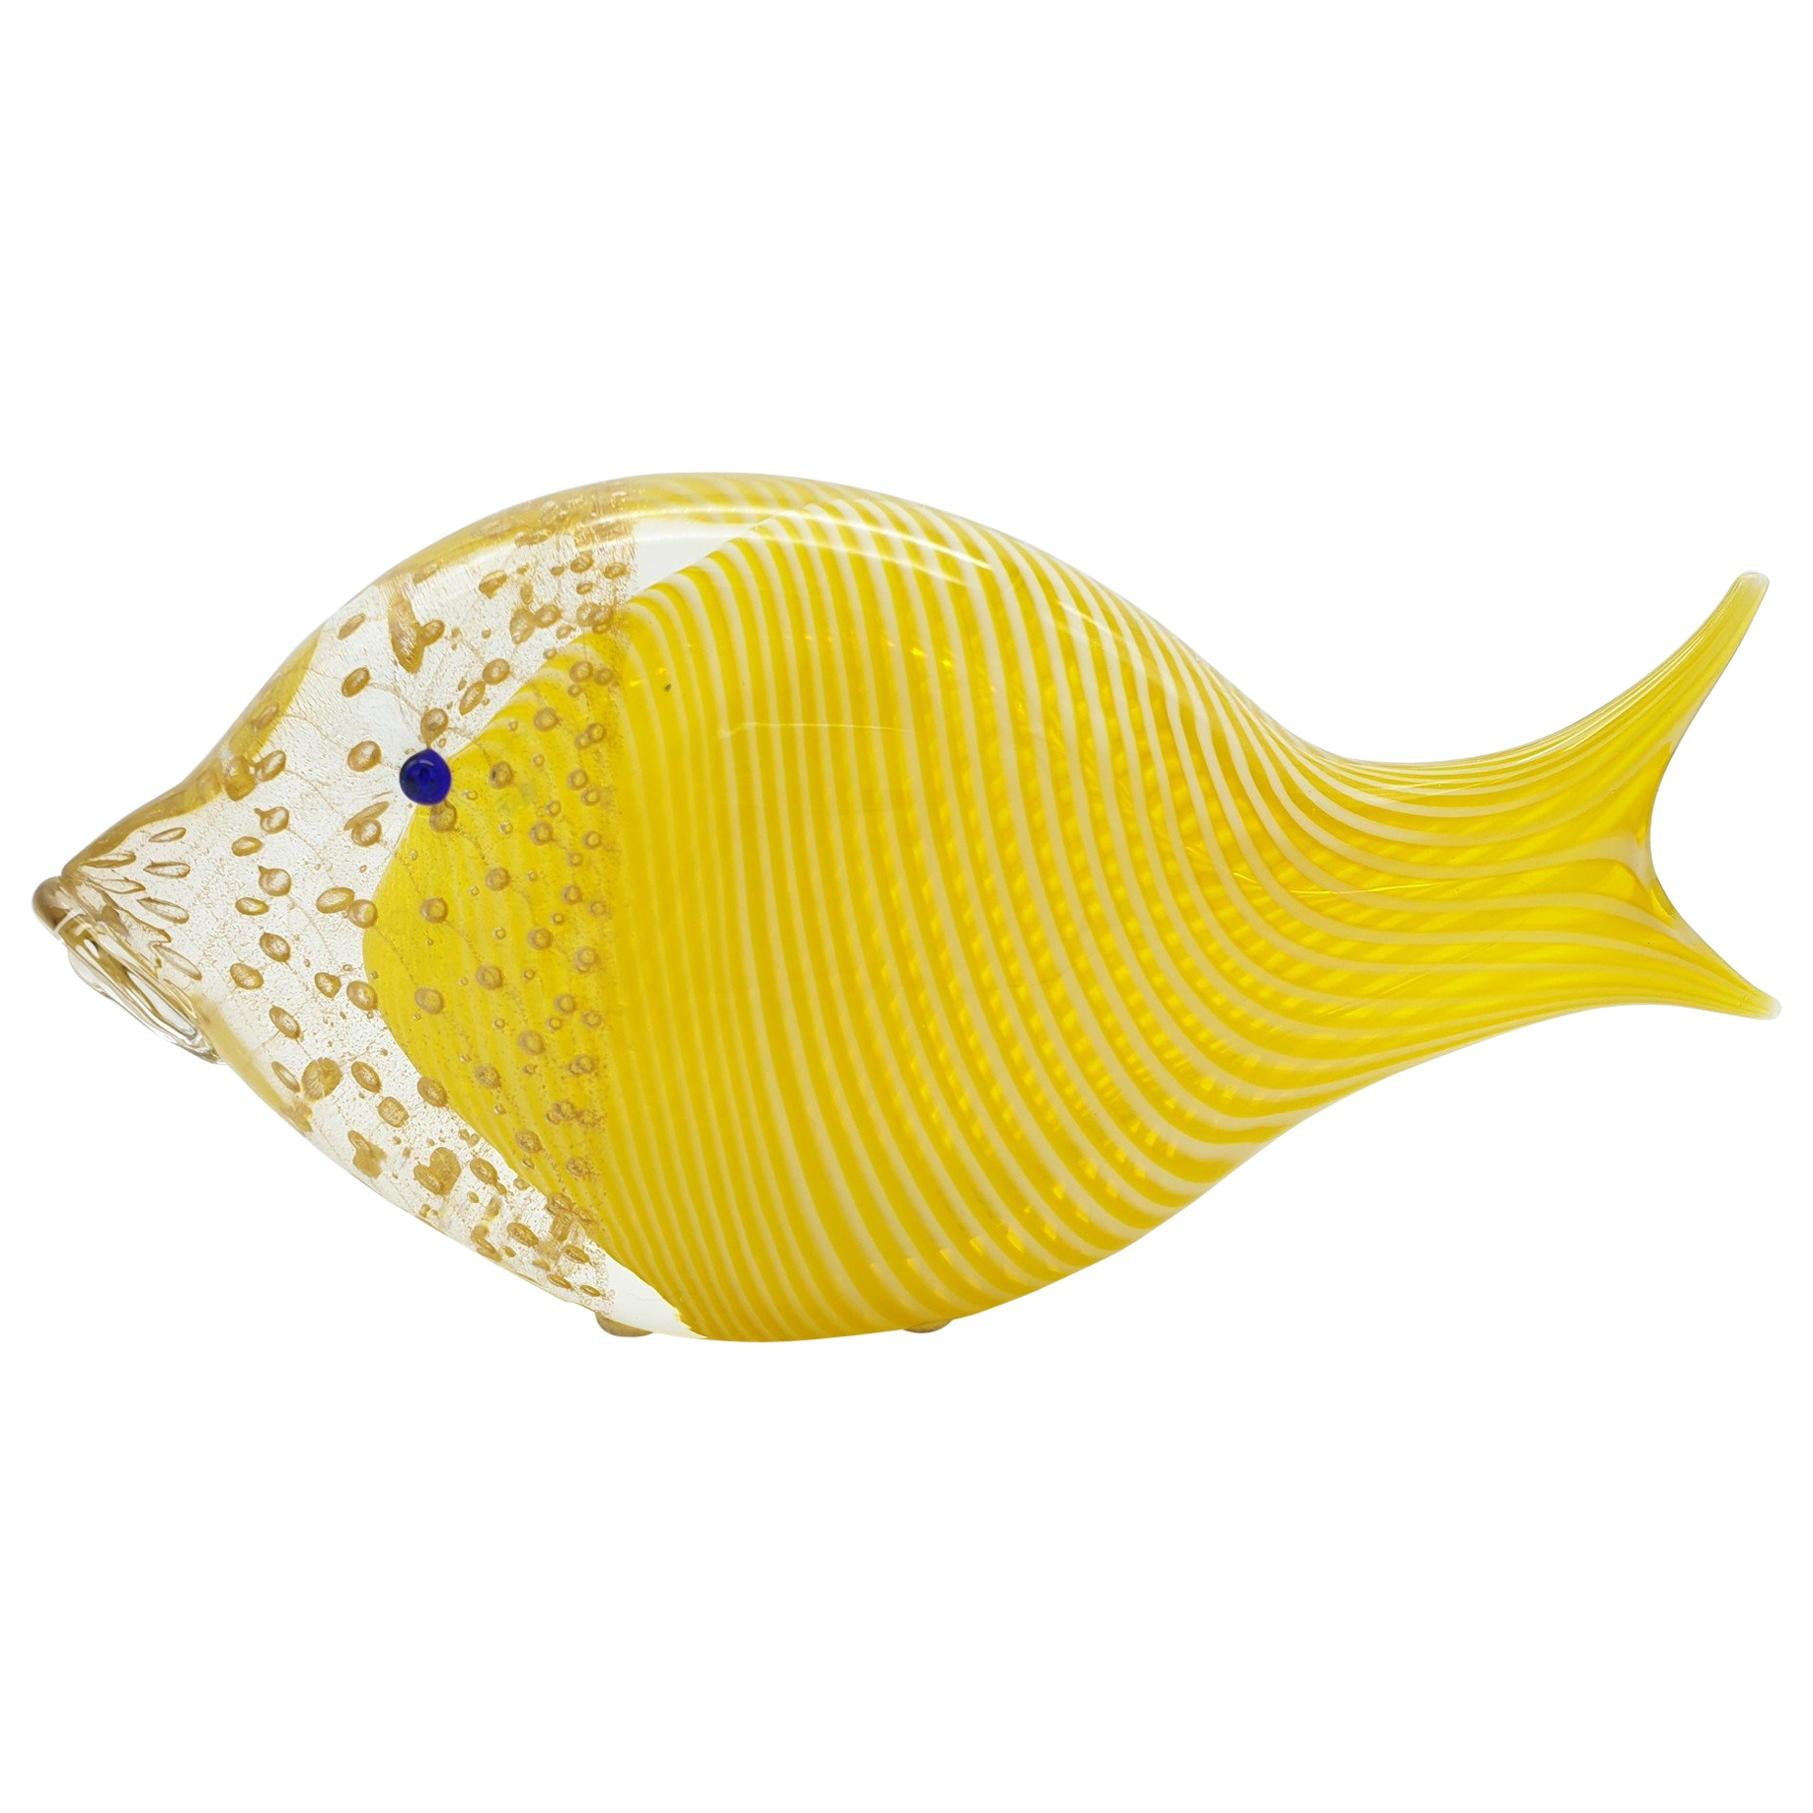 Modern Murano Glass Fish in Yellow & Gold Color with Bubbles by Cenedese, 1990s For Sale